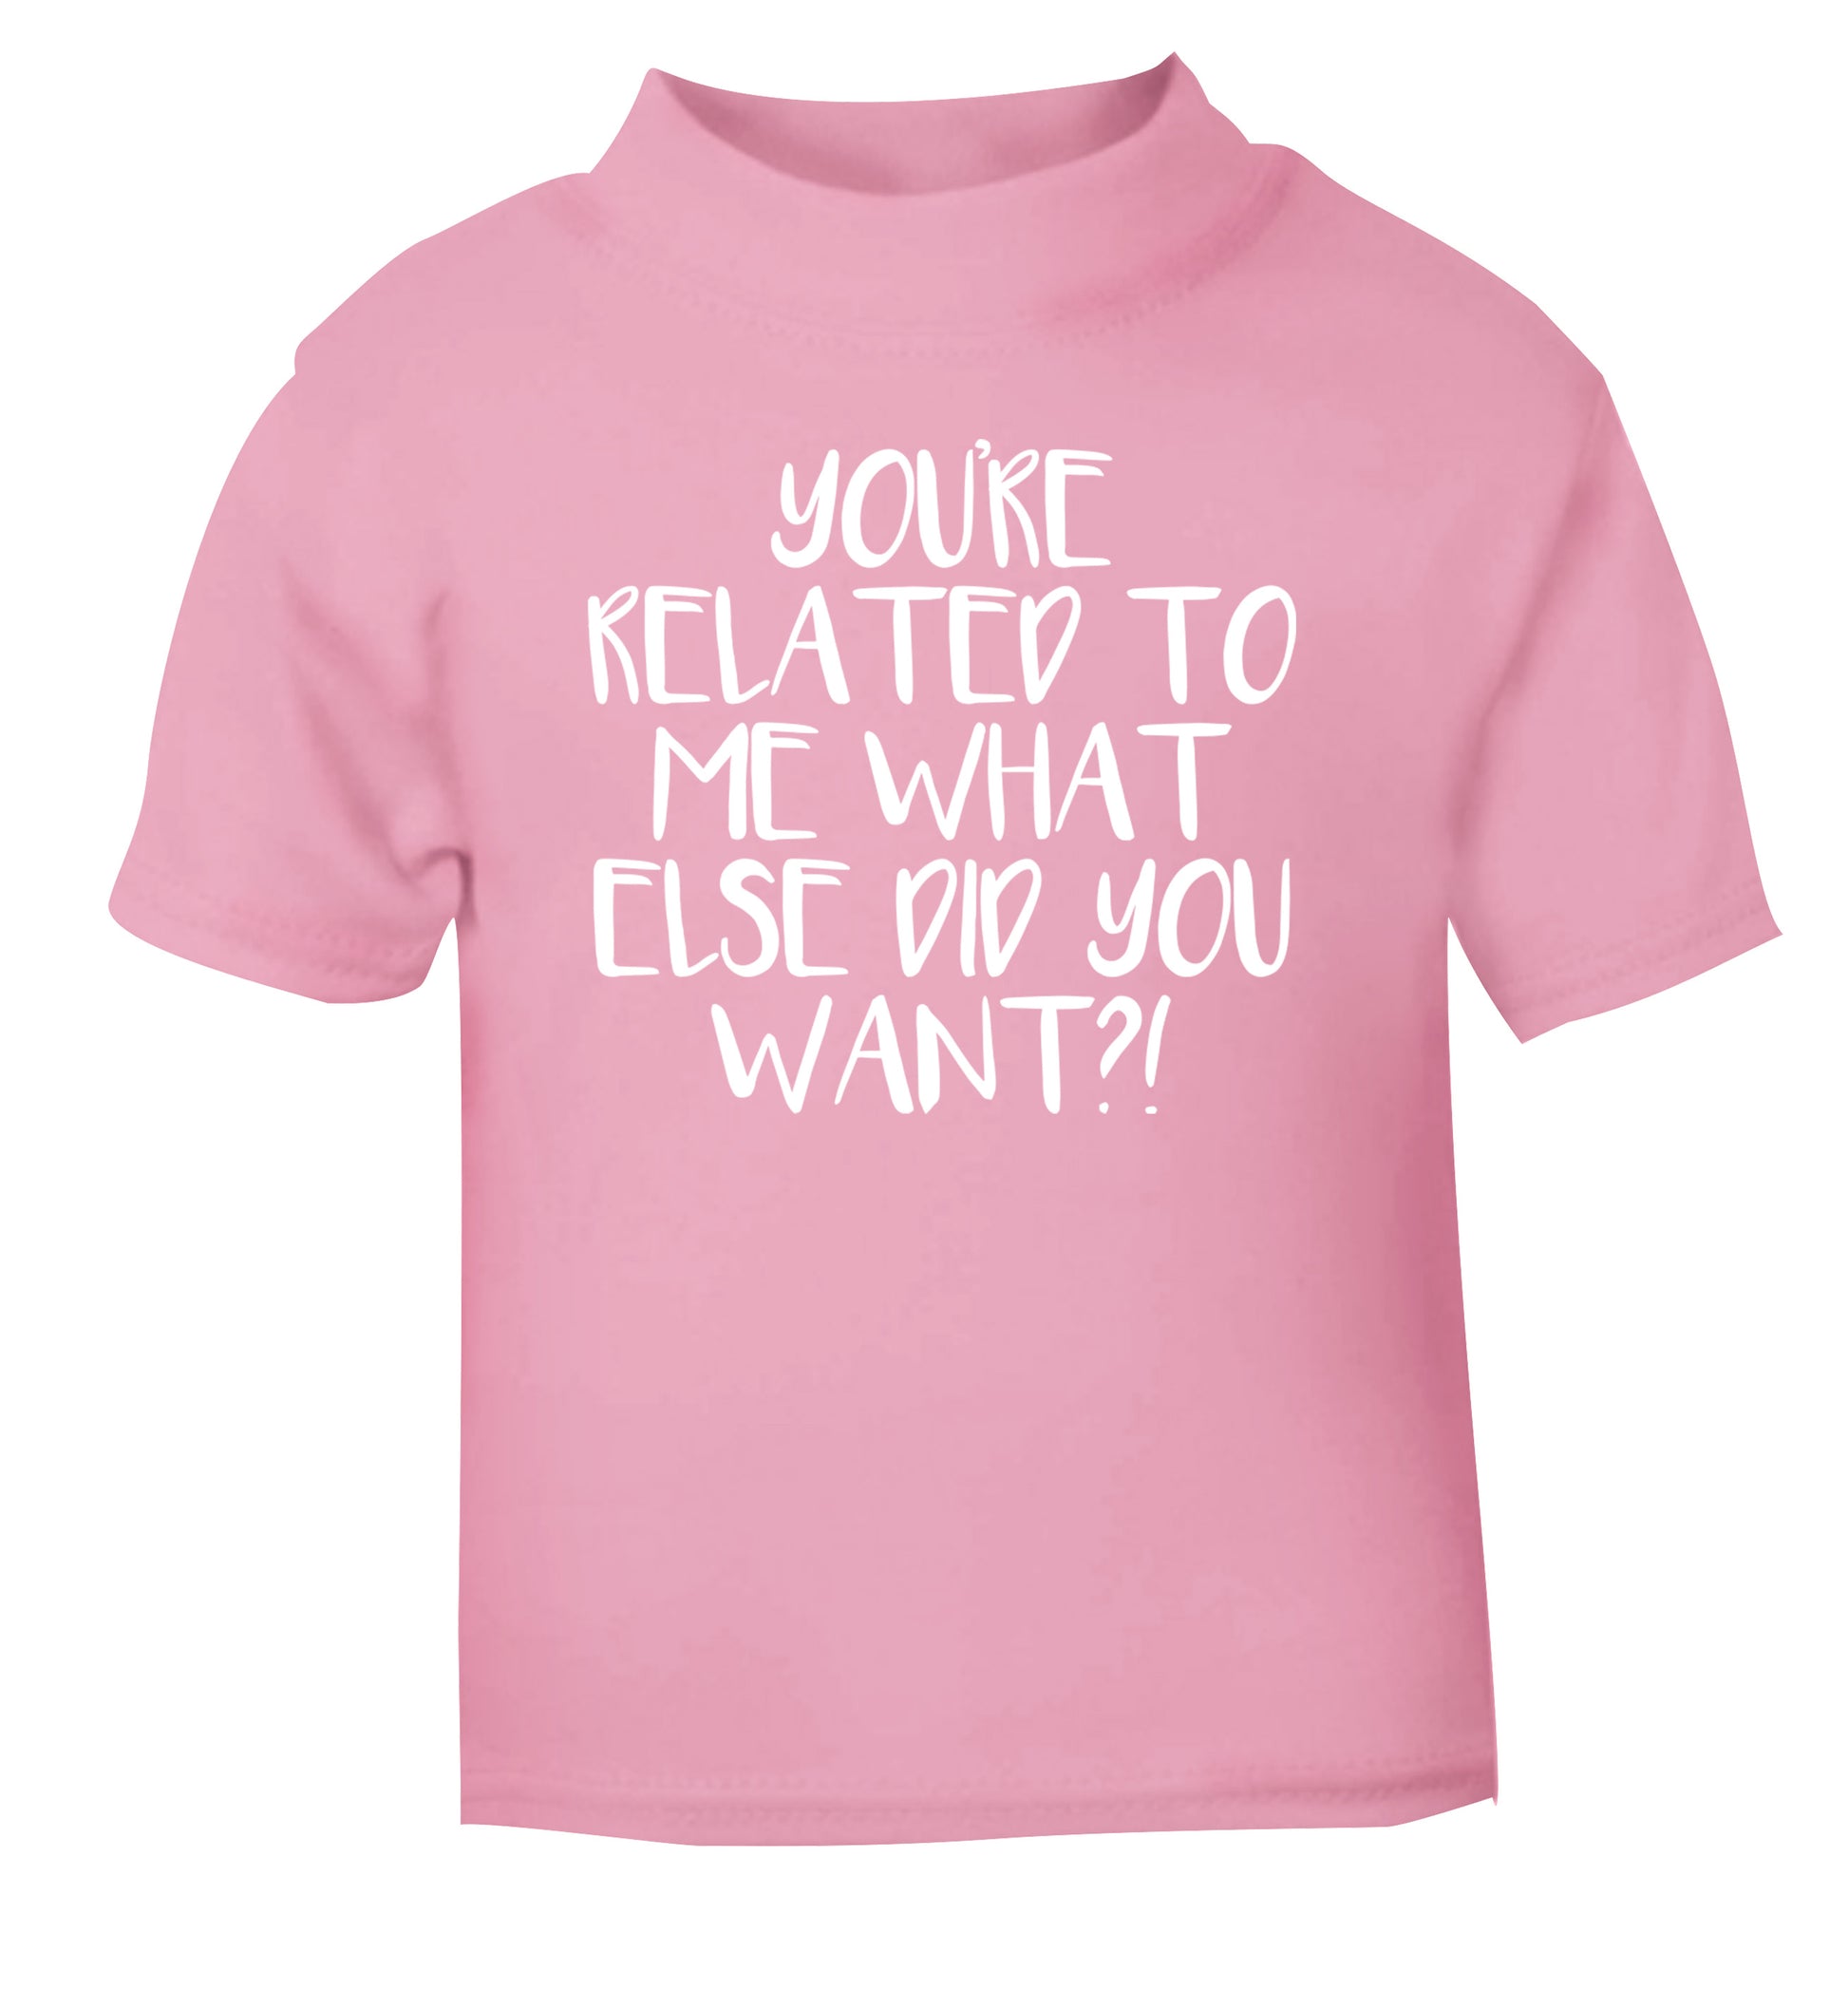 You're related to me what more do you want? light pink Baby Toddler Tshirt 2 Years